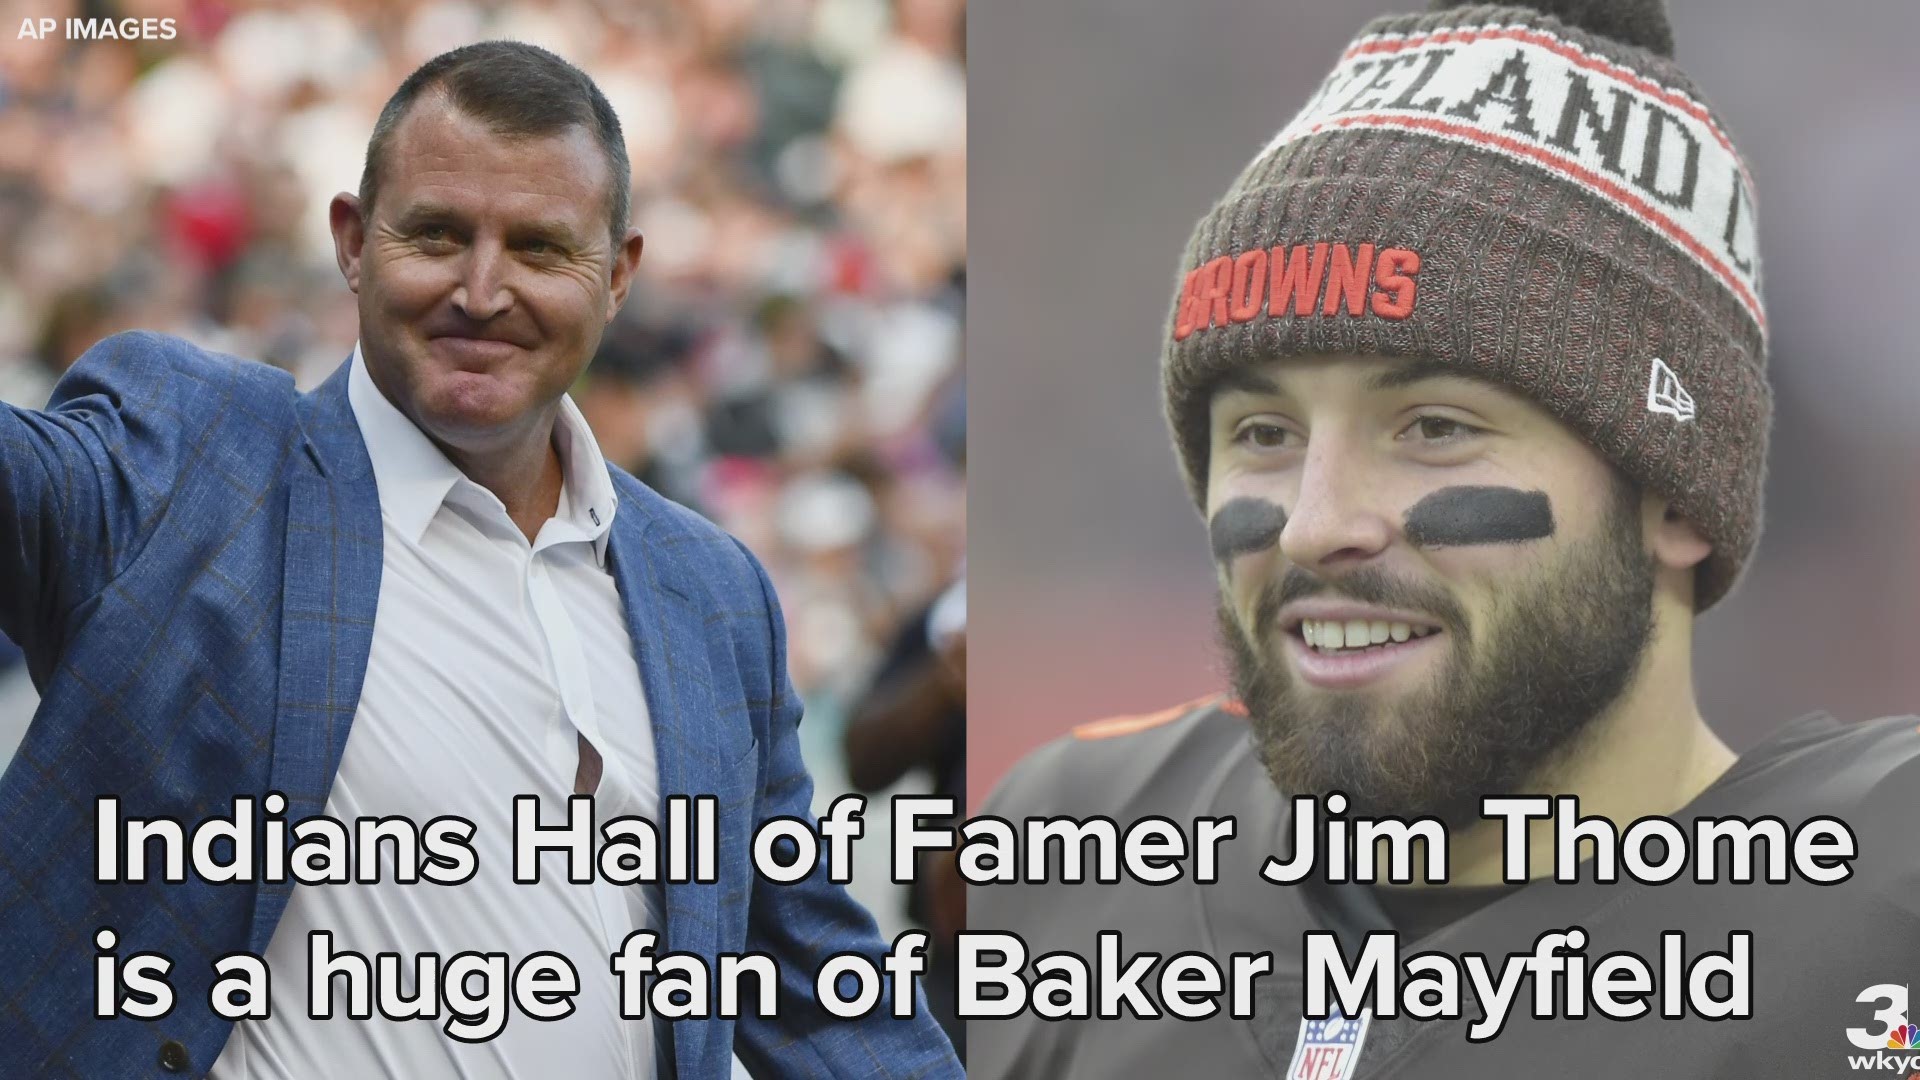 Among Cleveland Browns quarterback Baker Mayfield's growing list of fans, you can now add Cleveland Indians Hall of Famer Jim Thome.